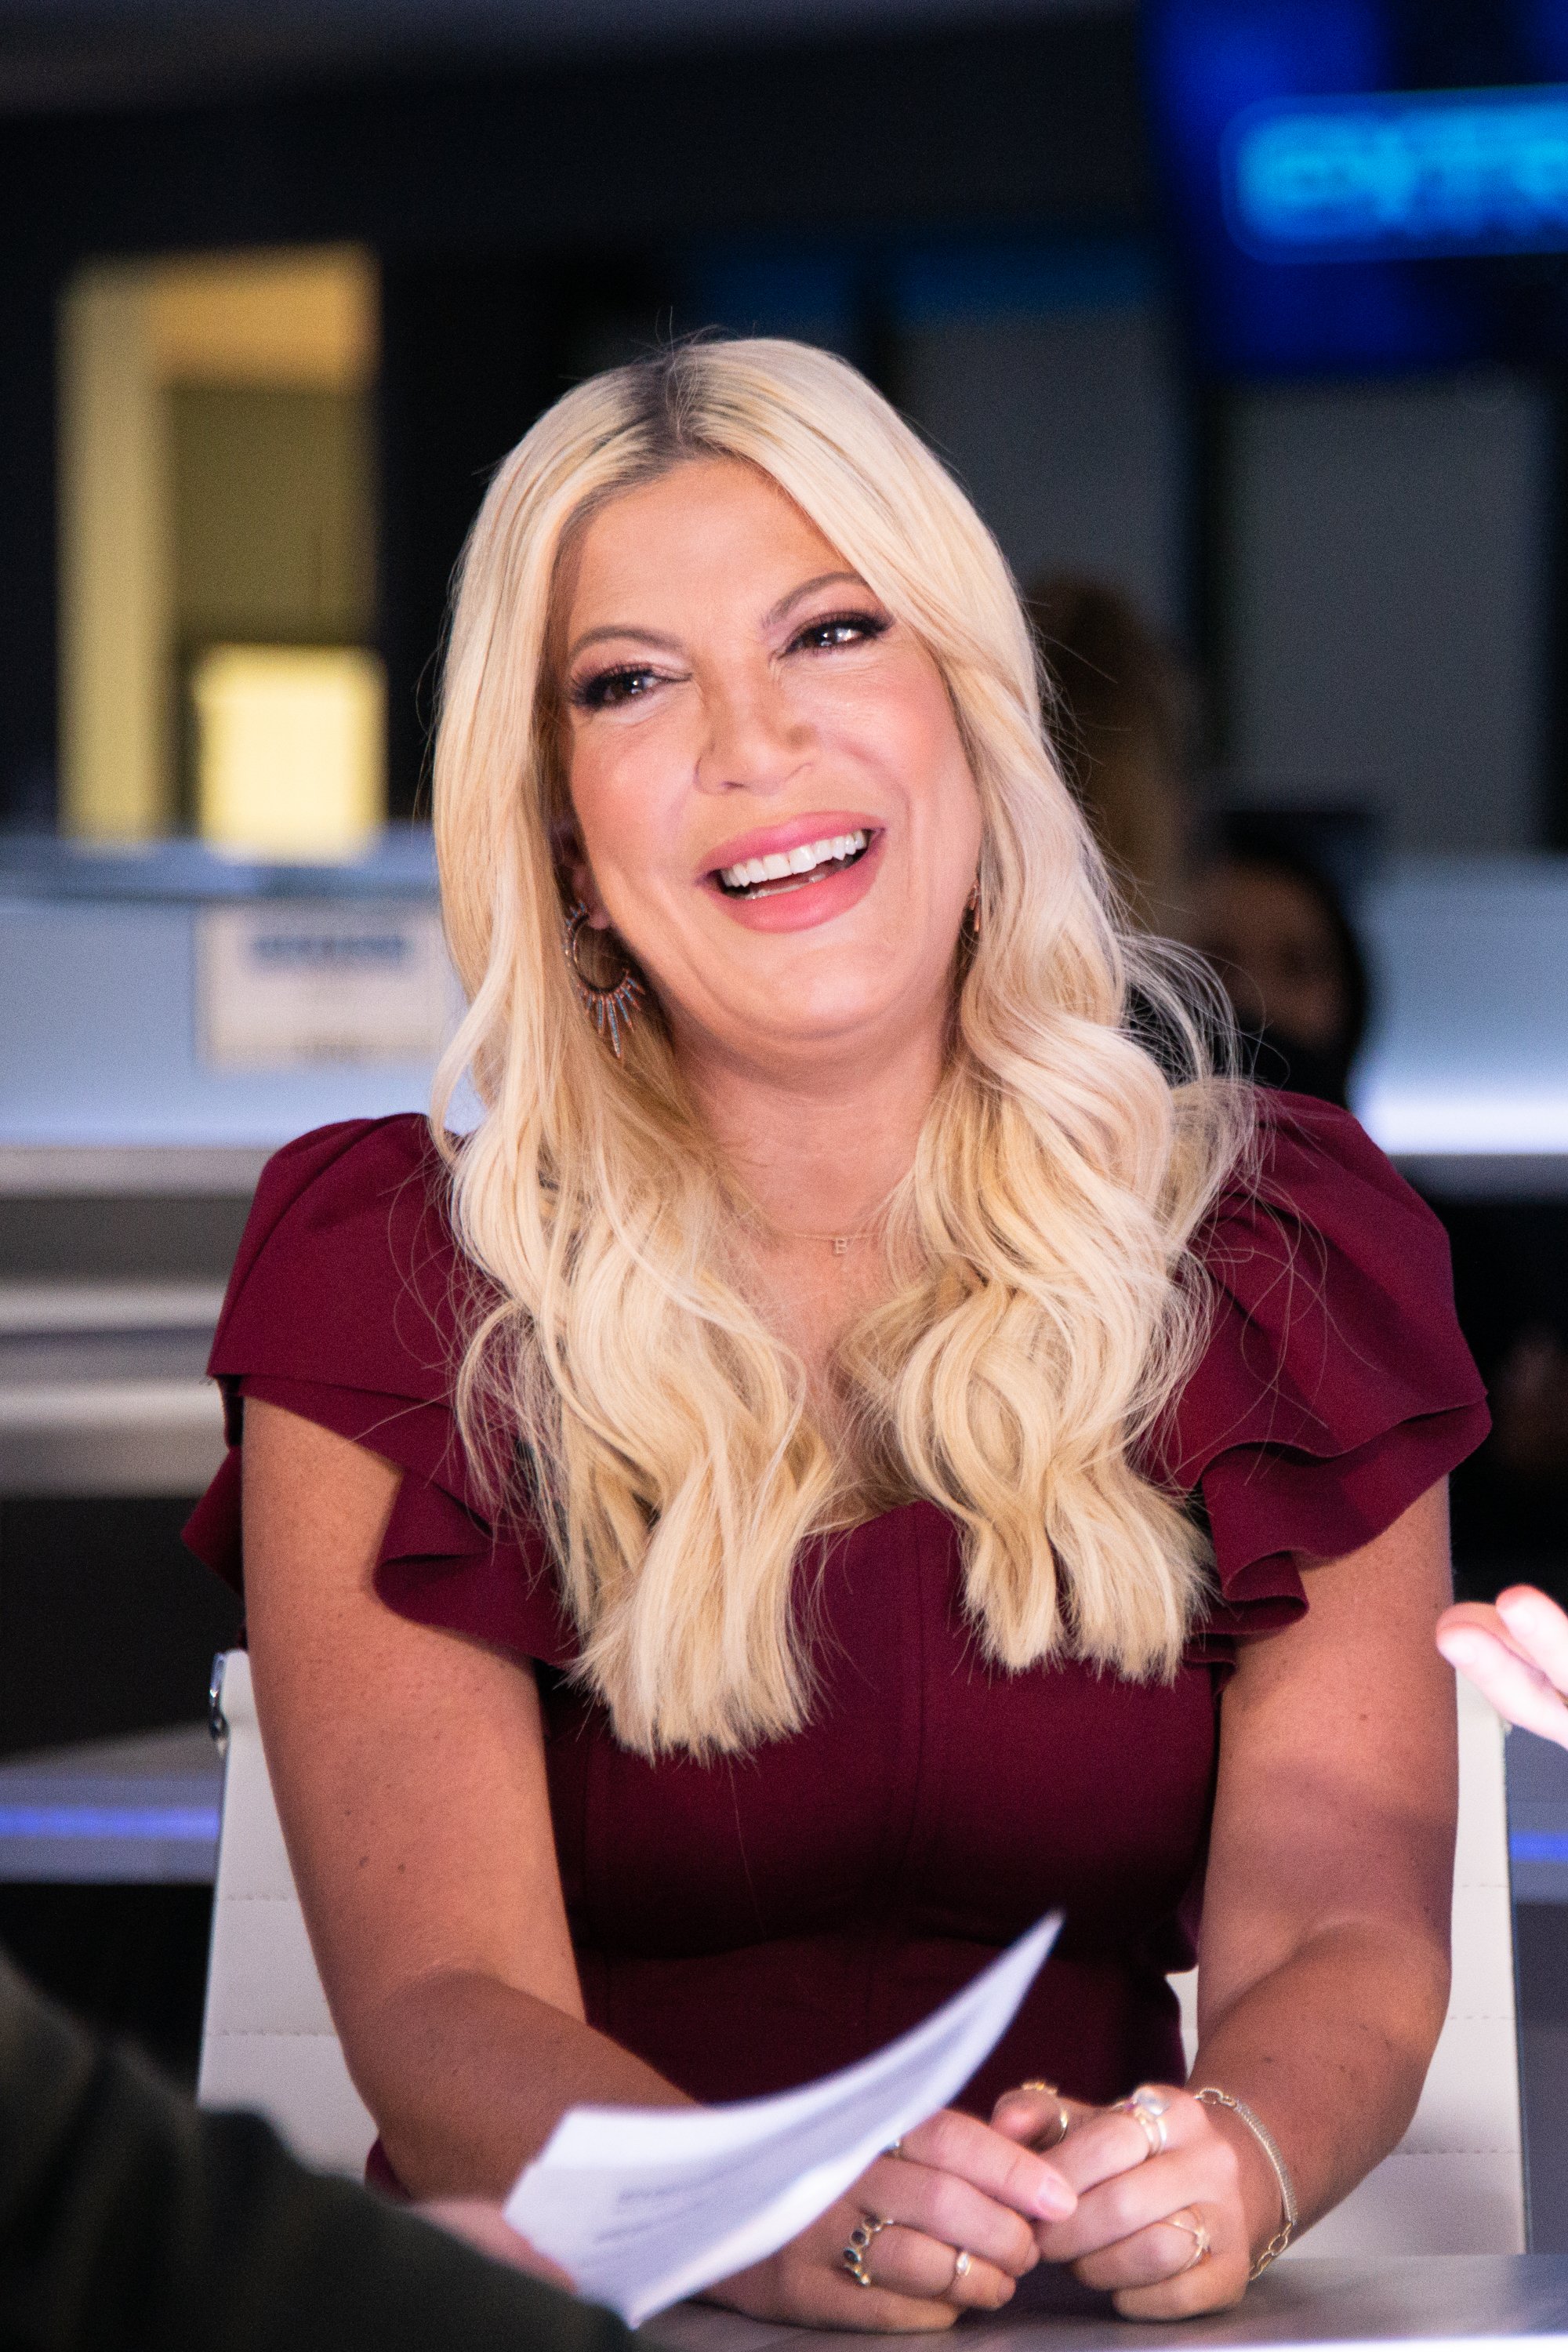 Tori Spelling visits "Extra" on September 11, 2019, in Burbank, California. | Source: Getty Images.